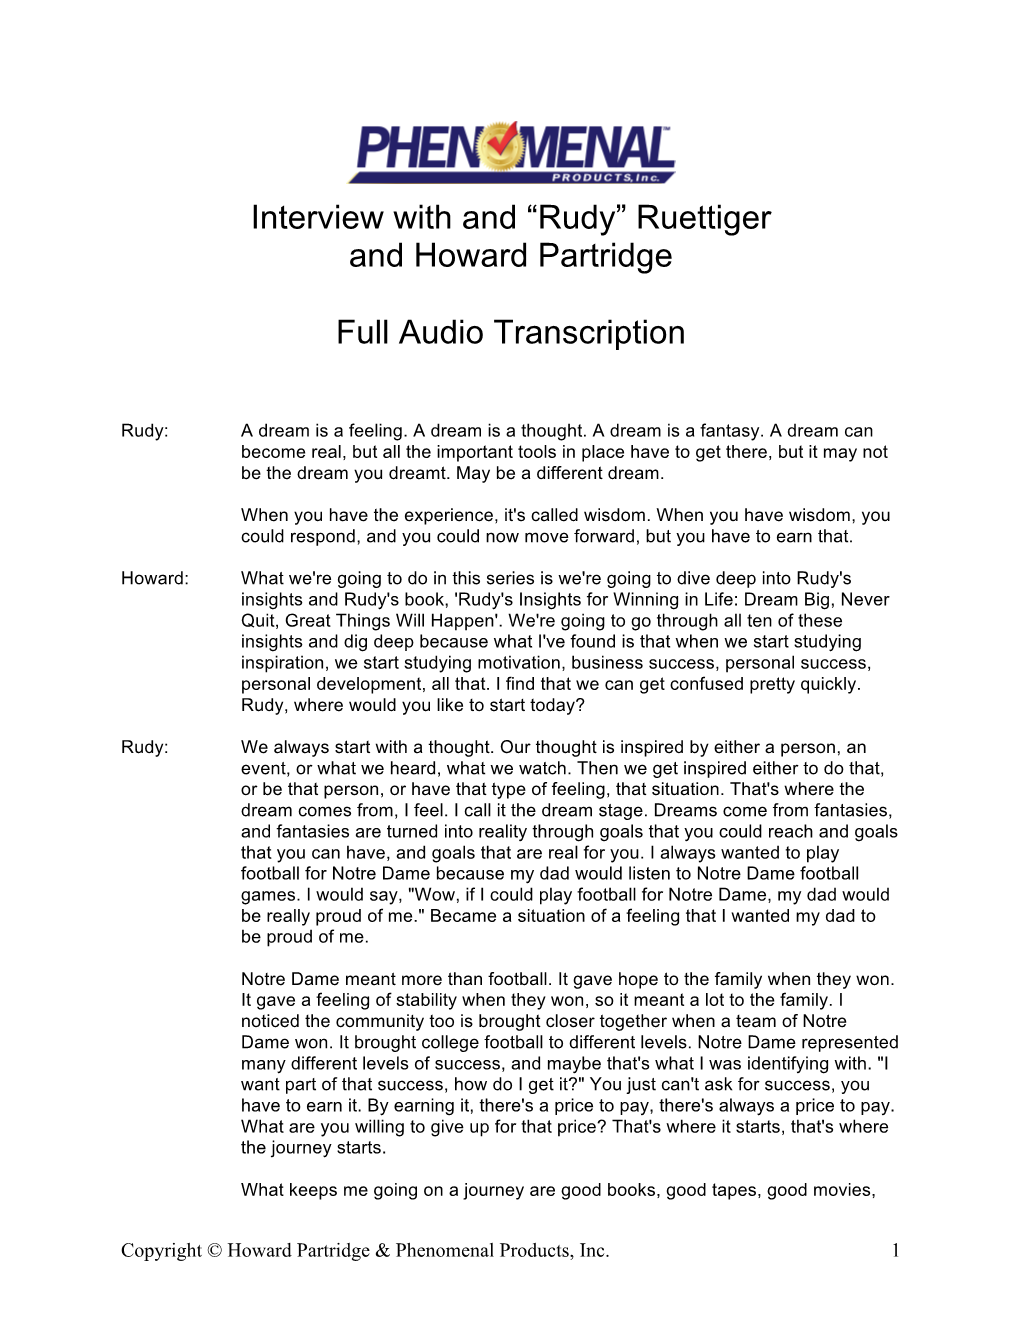 Interview with and “Rudy” Ruettiger and Howard Partridge Full Audio Transcription